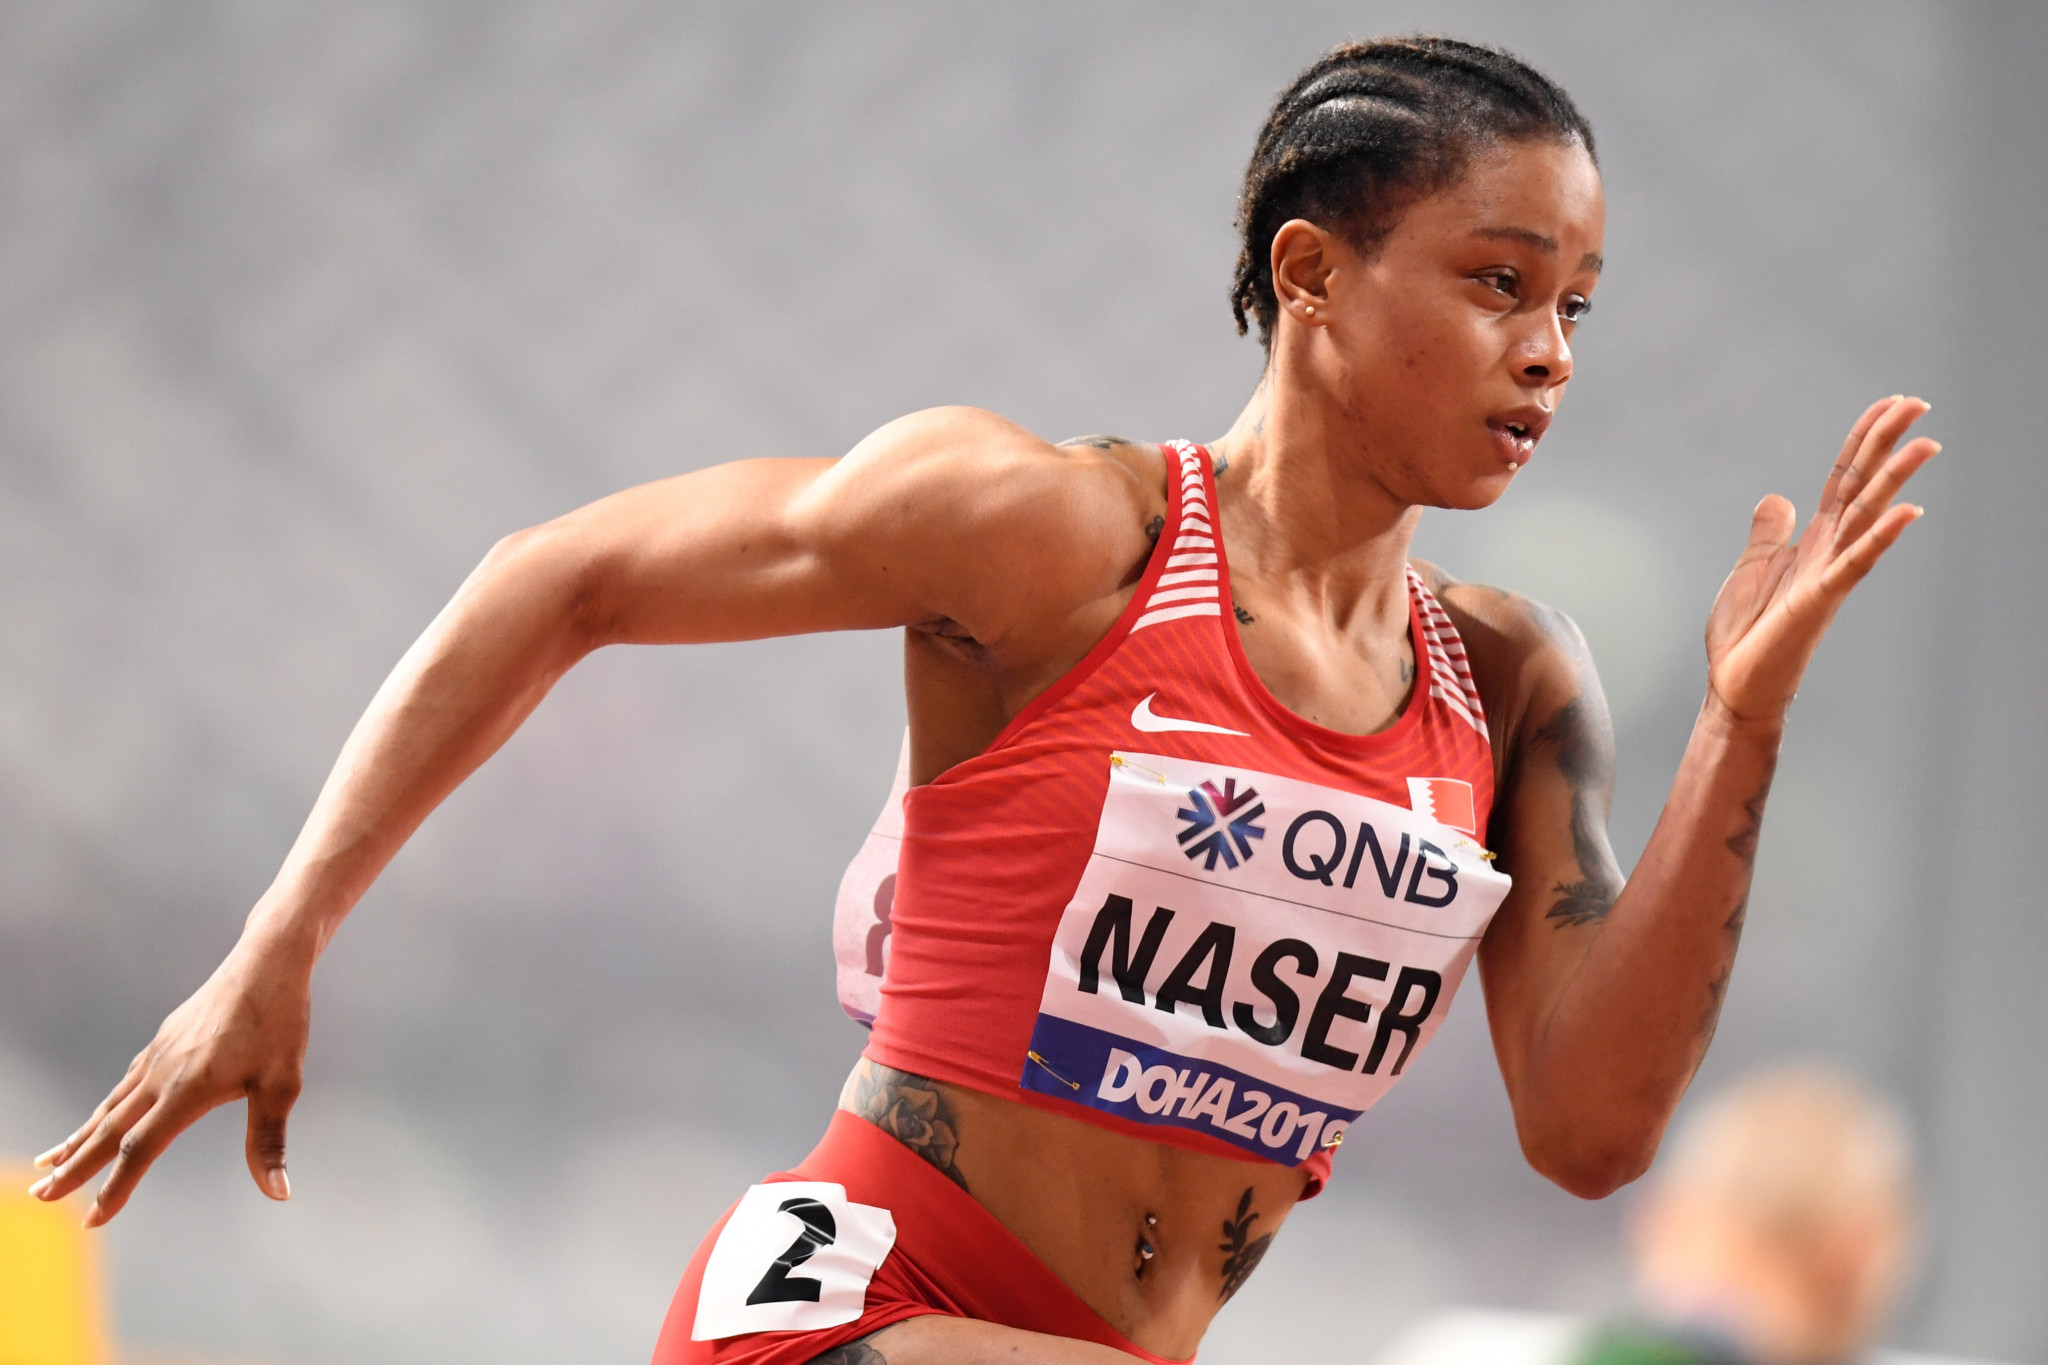 Having run the third-fastest 400m race in history to win the world title in 2019, Salwa Eid Naser would have been a major medal threat at Tokyo 2020 ©Getty Images